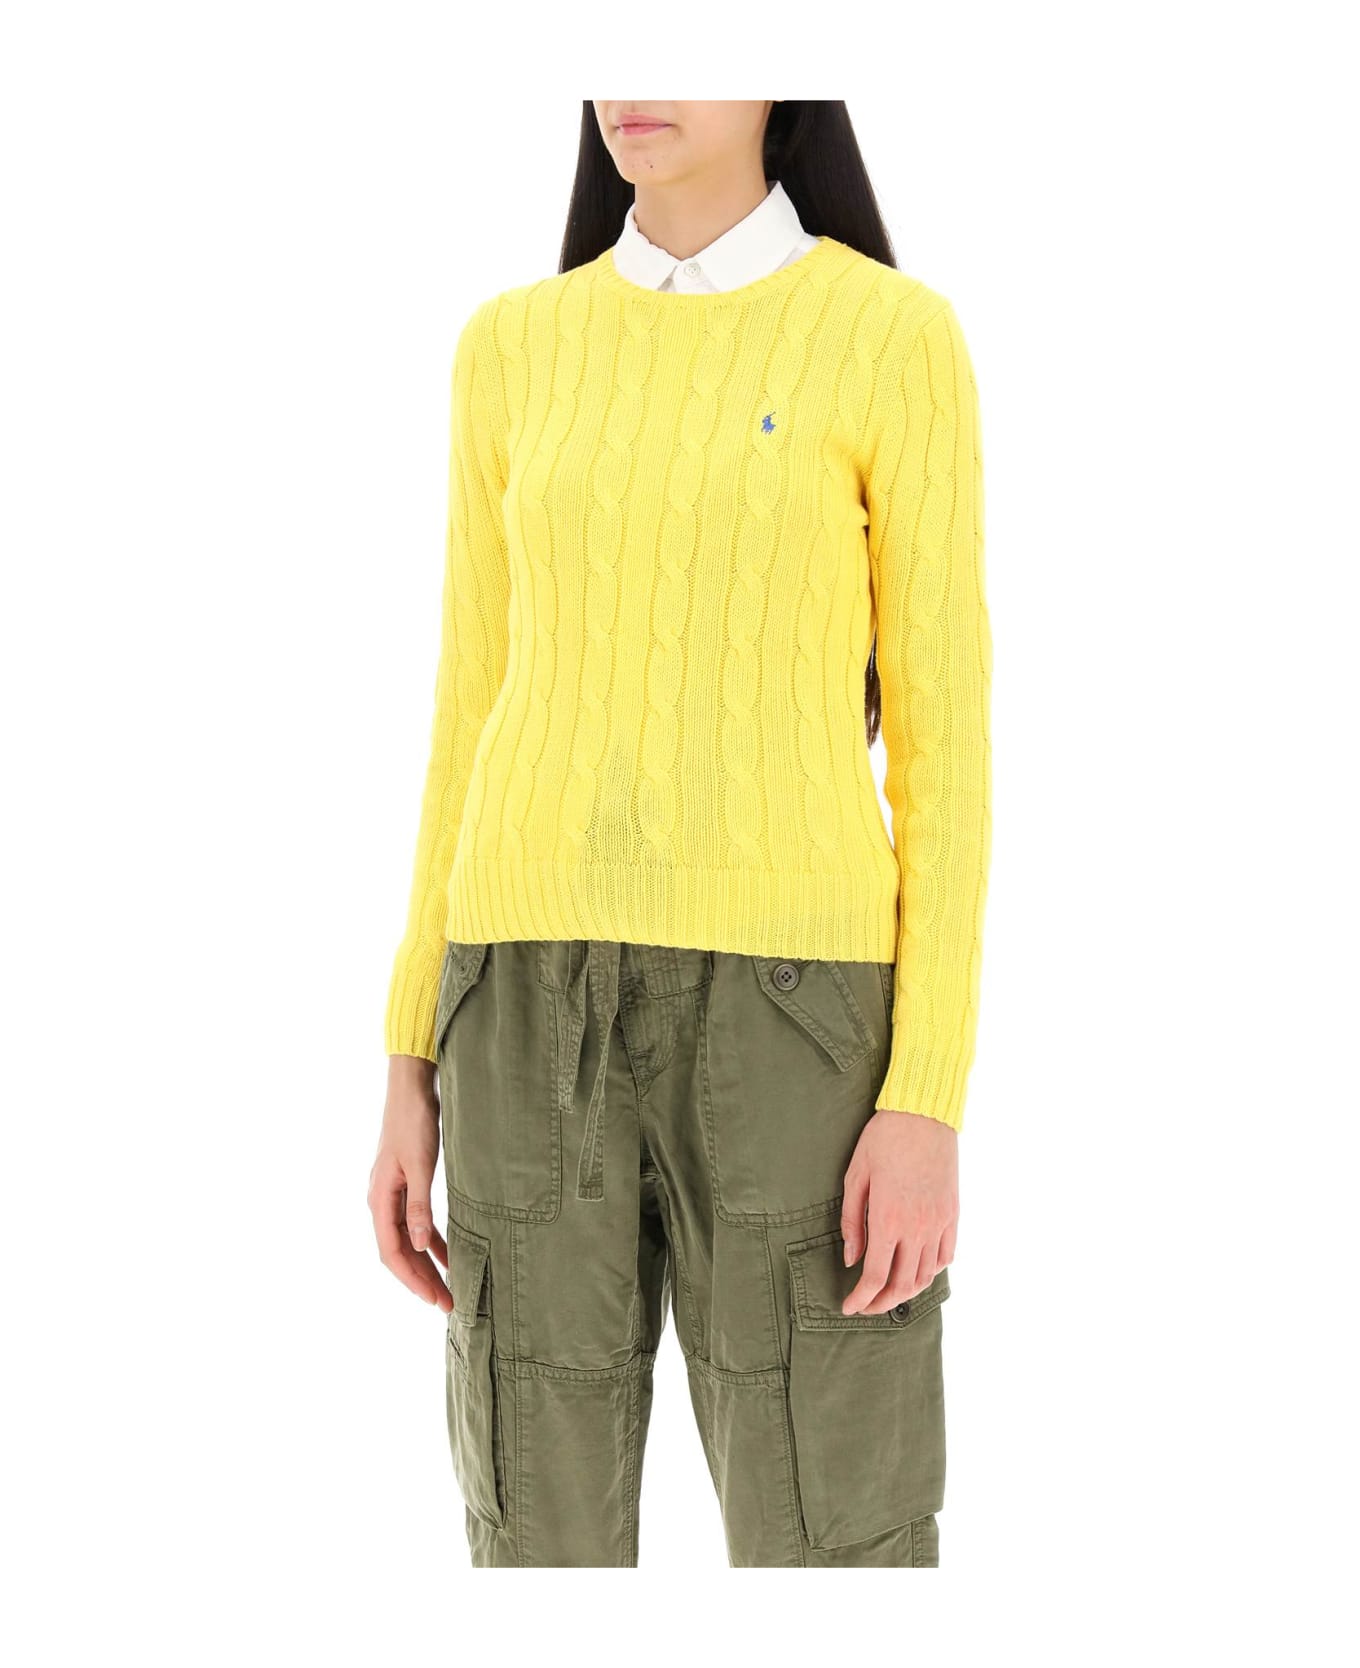 Polo Ralph Lauren Cable Knit Cotton Sweater - TRAINER YELLOW (Yellow) ニットウェア